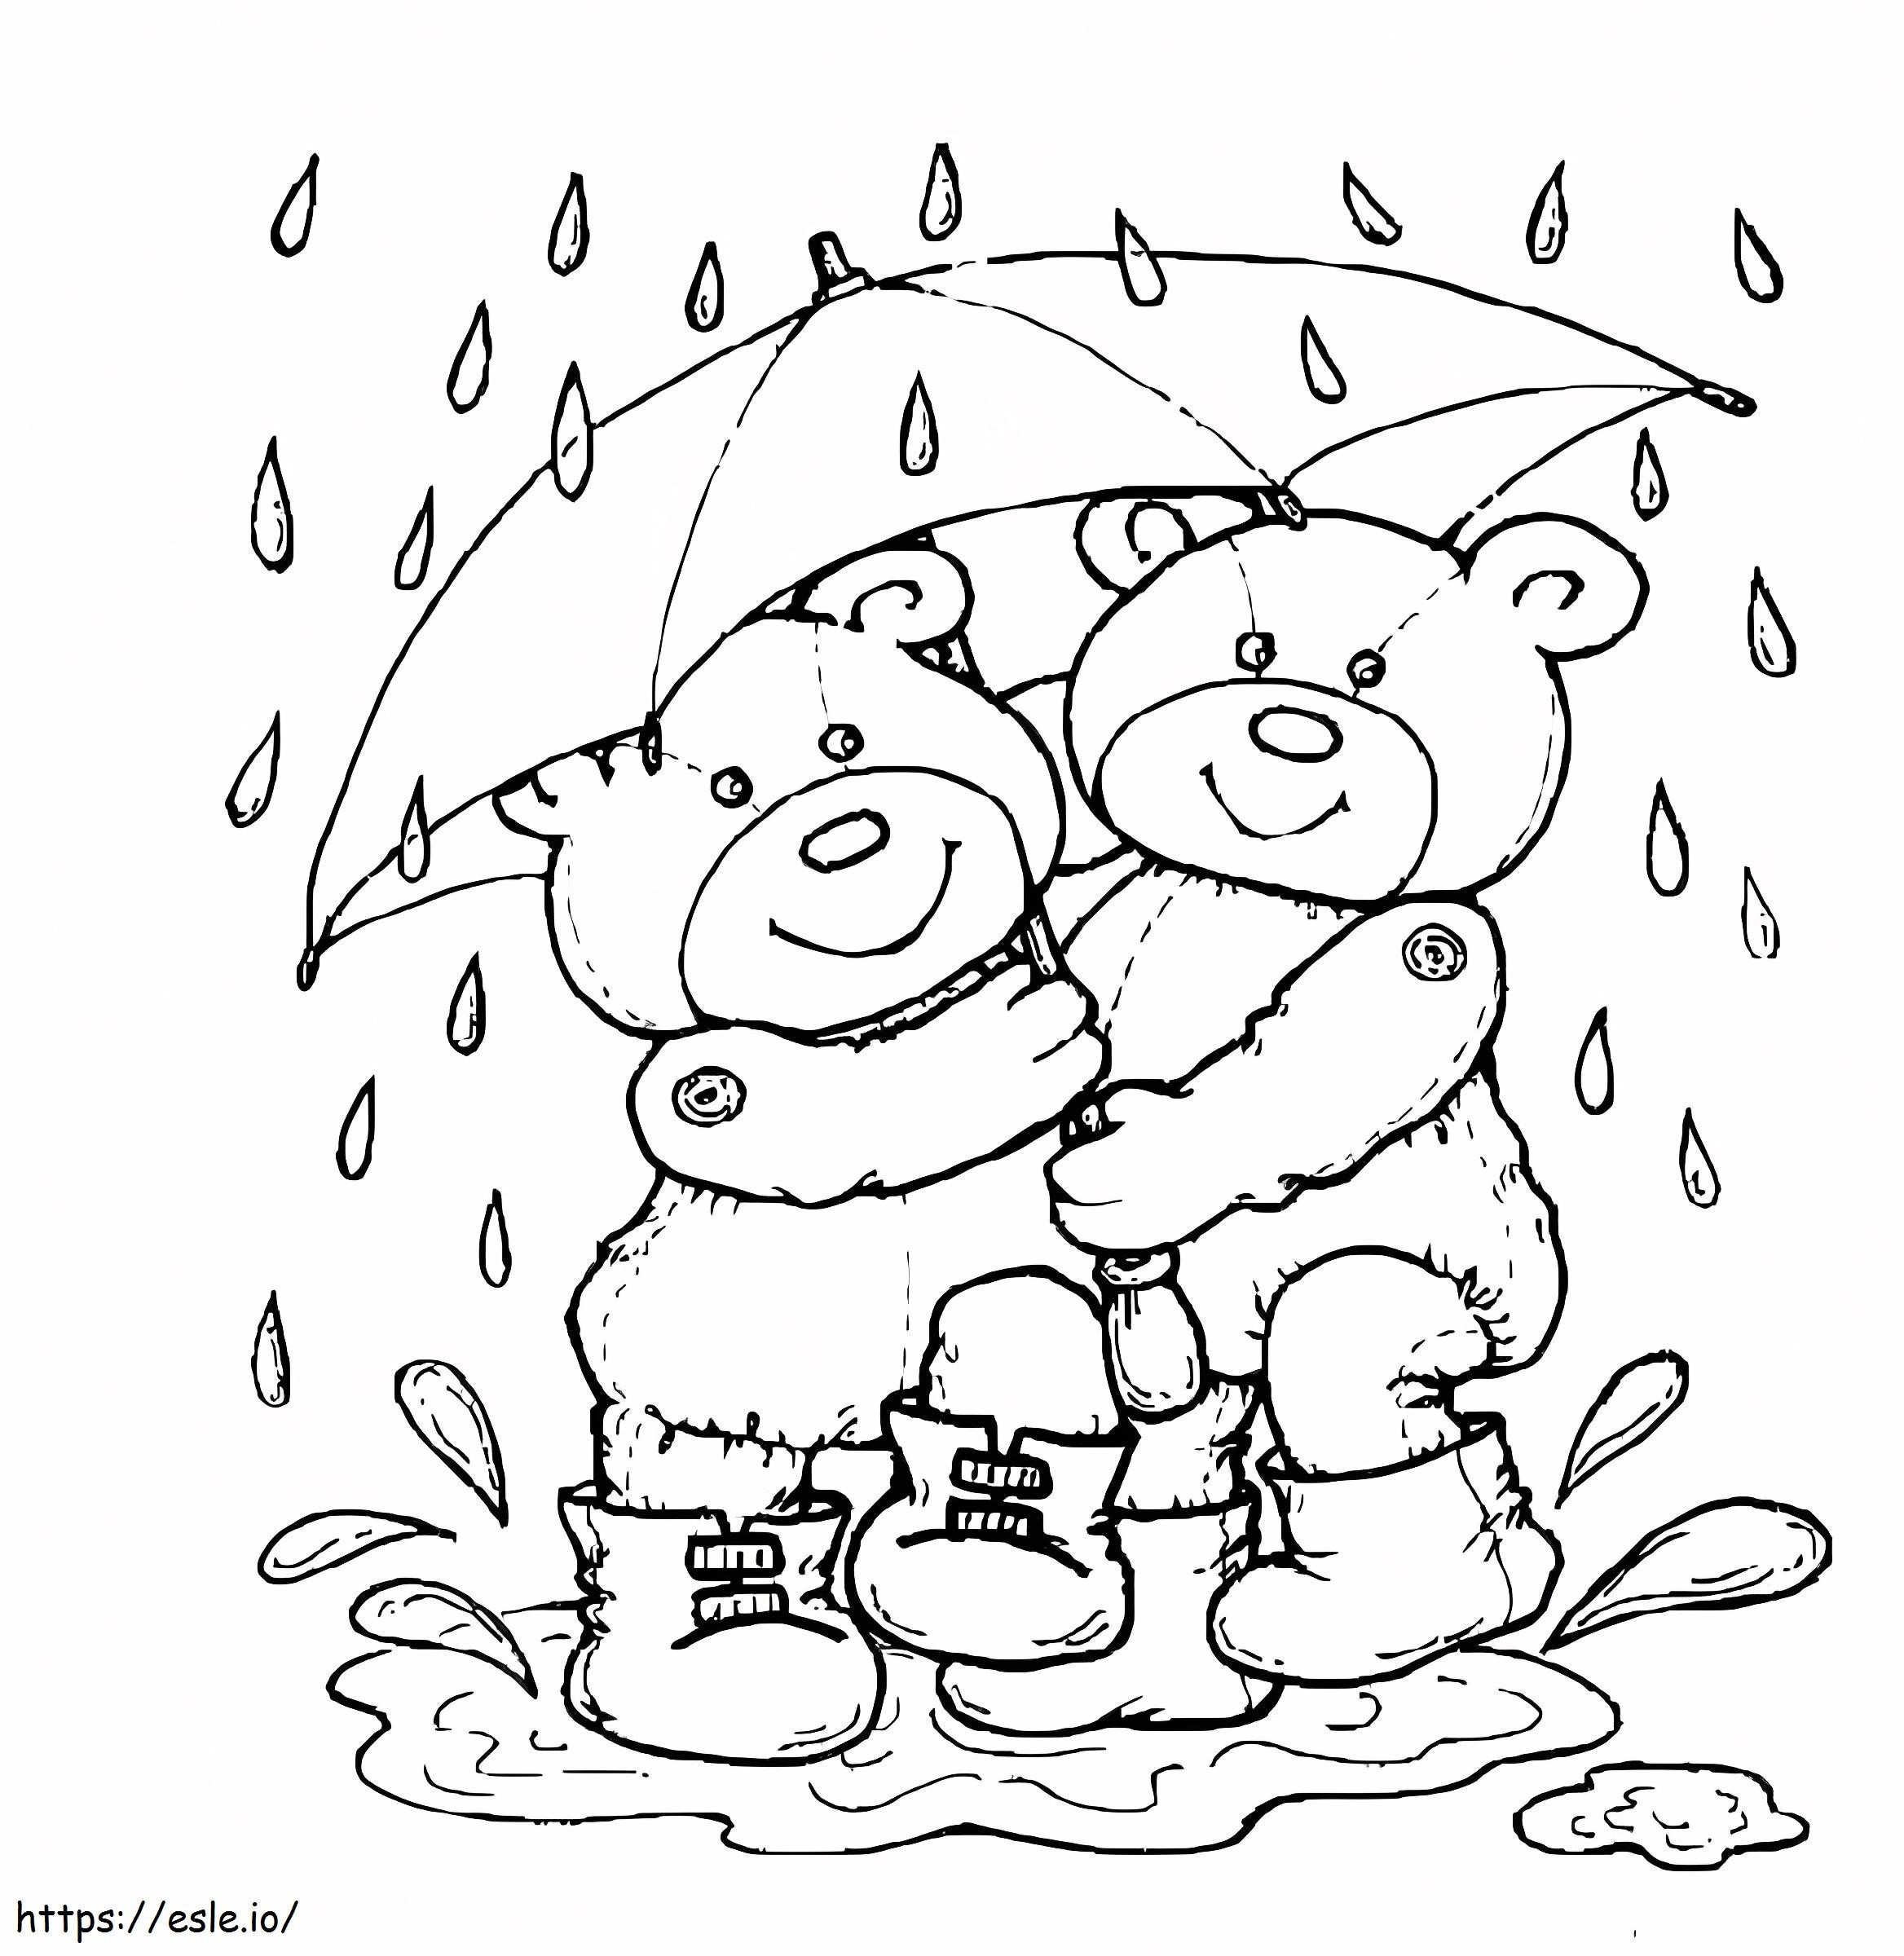 Teddy Bears In Rain coloring page